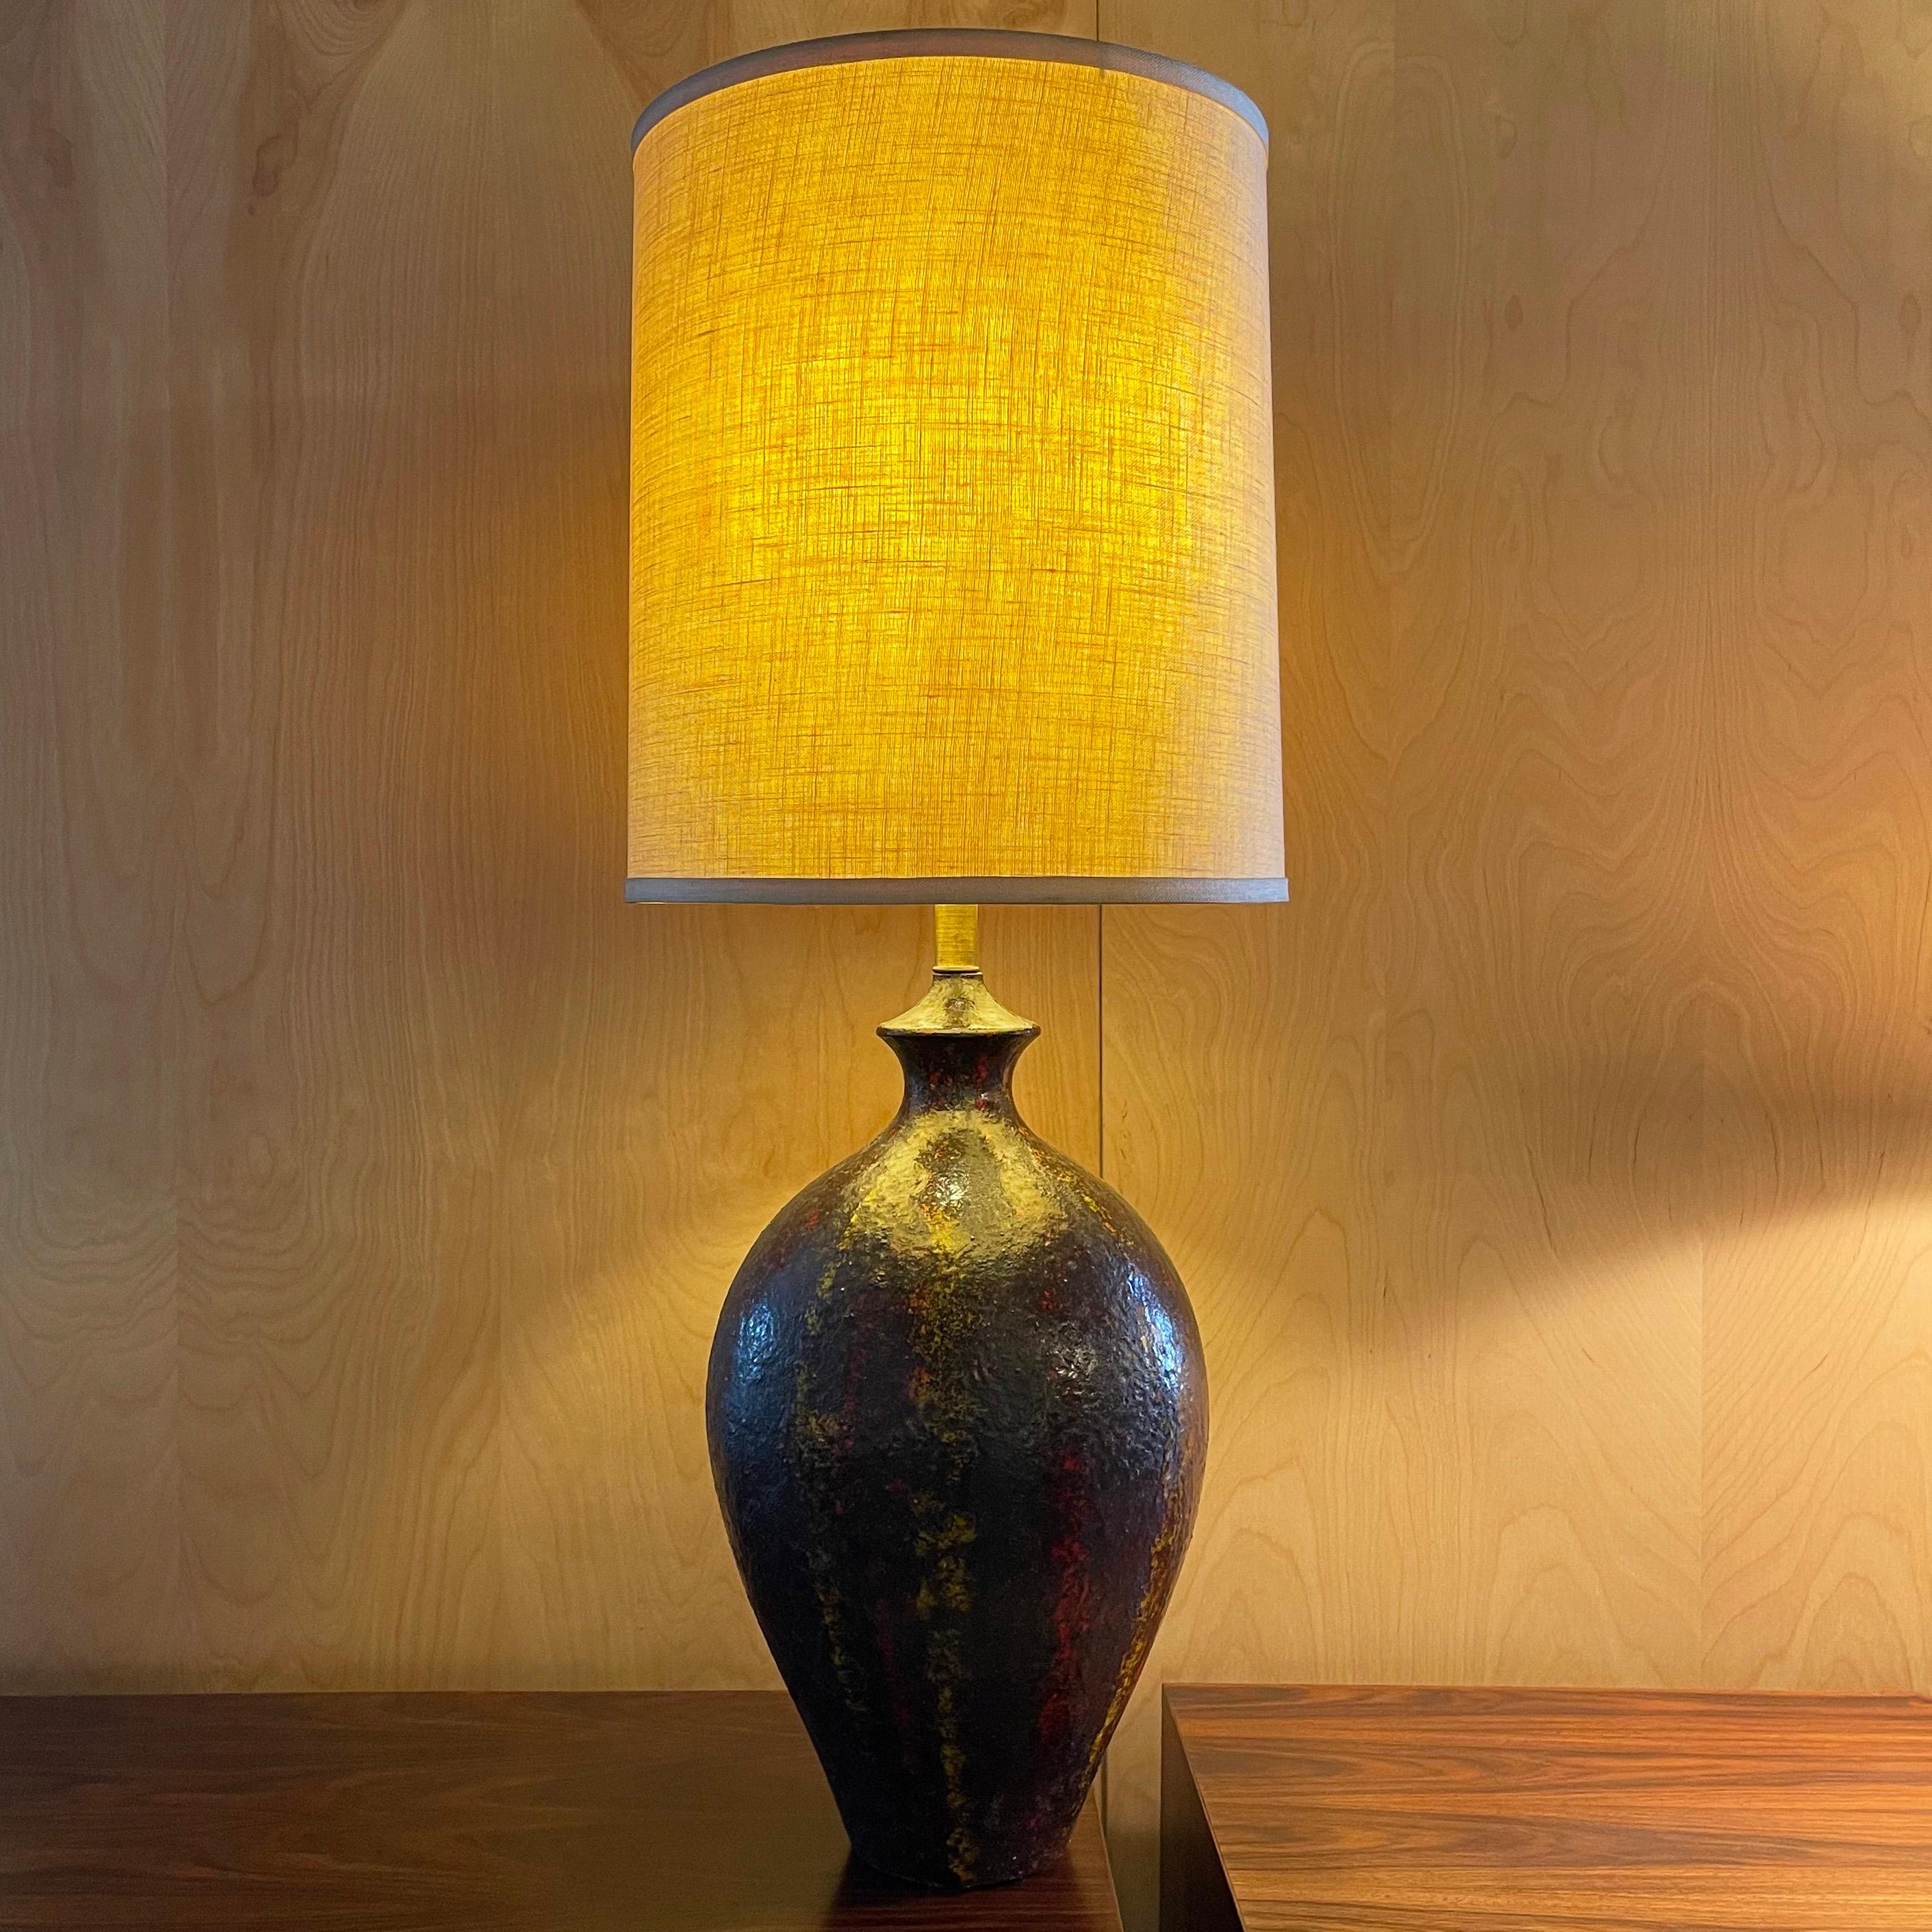 Large, Mid-Century Modern, table lamp features an urn shape, art pottery, Brutalist glaze base in shades of brown, yellow and red with brass neck. The vintage linen drum shade measures 15 inches diameter x 18 inches height. Overall height with shade